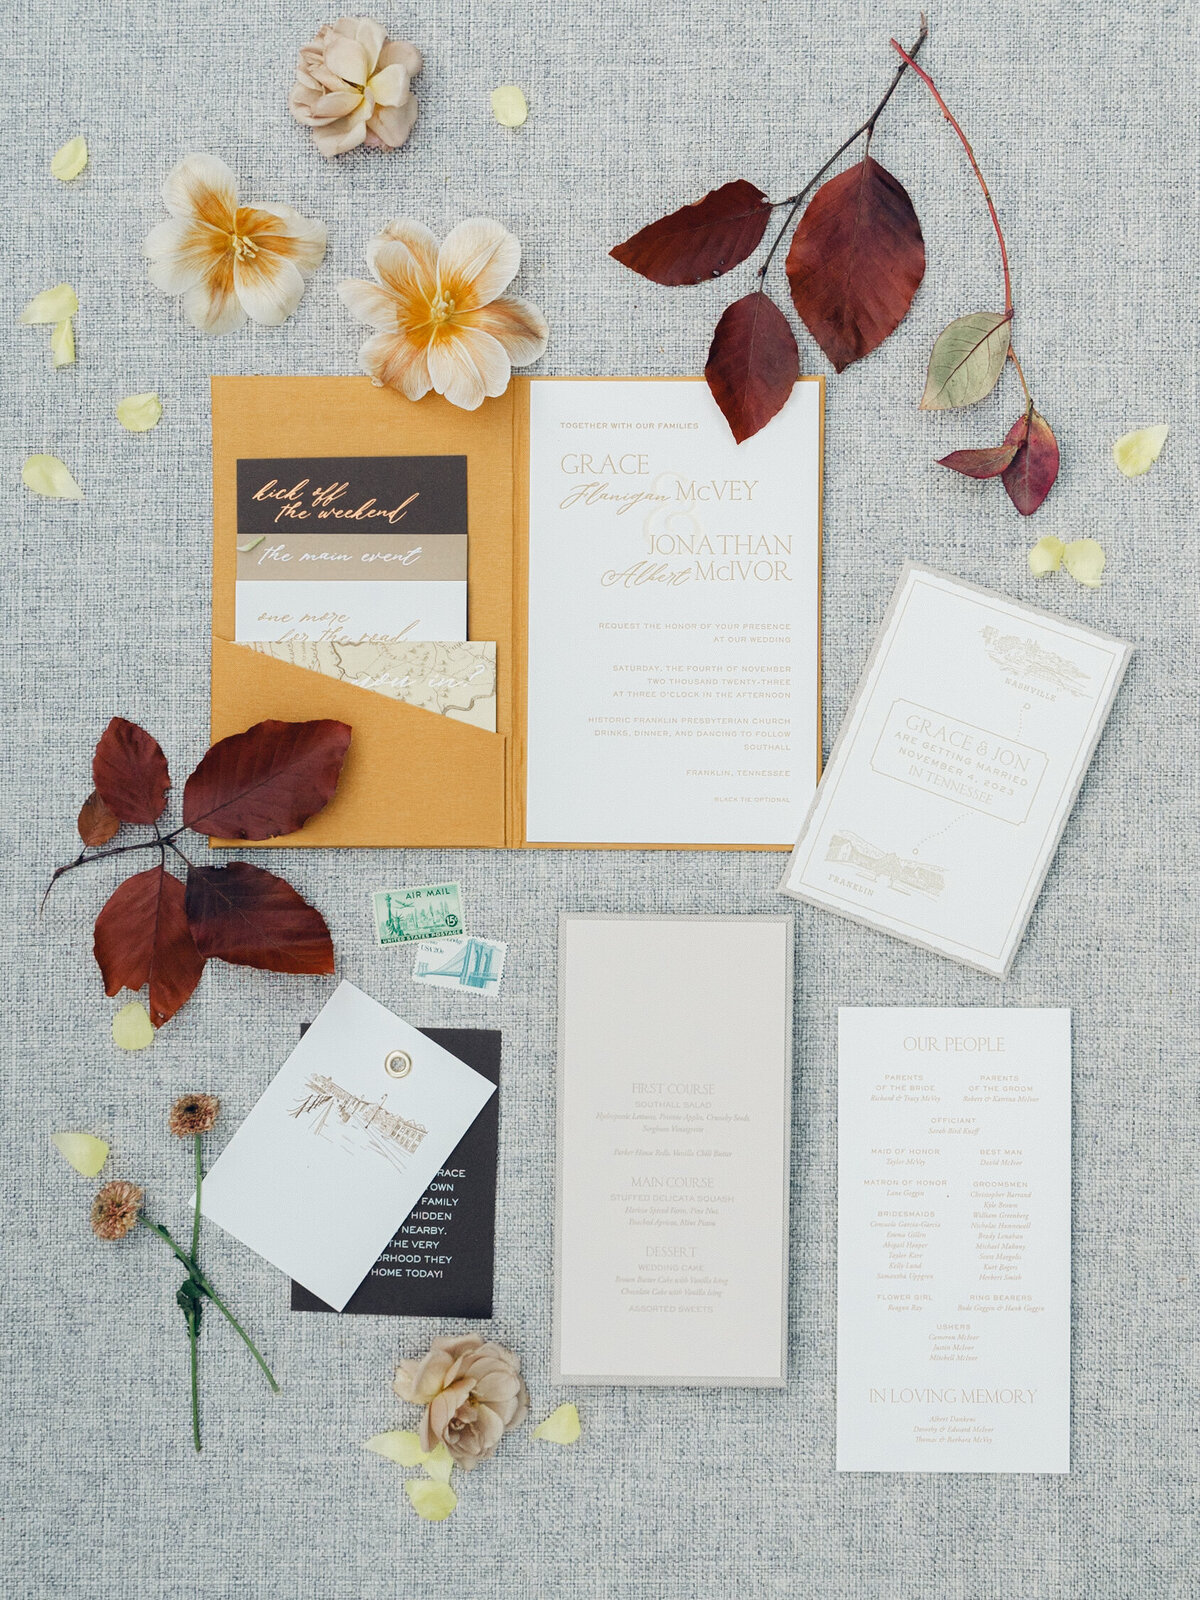 Unique and classic fall wedding in Tennessee countryside. Wedding colors of caramel, honey, dusty rose, and burgundy make perfect fall wedding florals. Roses, ranunculus, wildflowers, and fall foliage invite warm tones for outdoor fall wedding outside Nashville, TN. Design by Rosemary & Finch Floral Design in Nashville, TN.